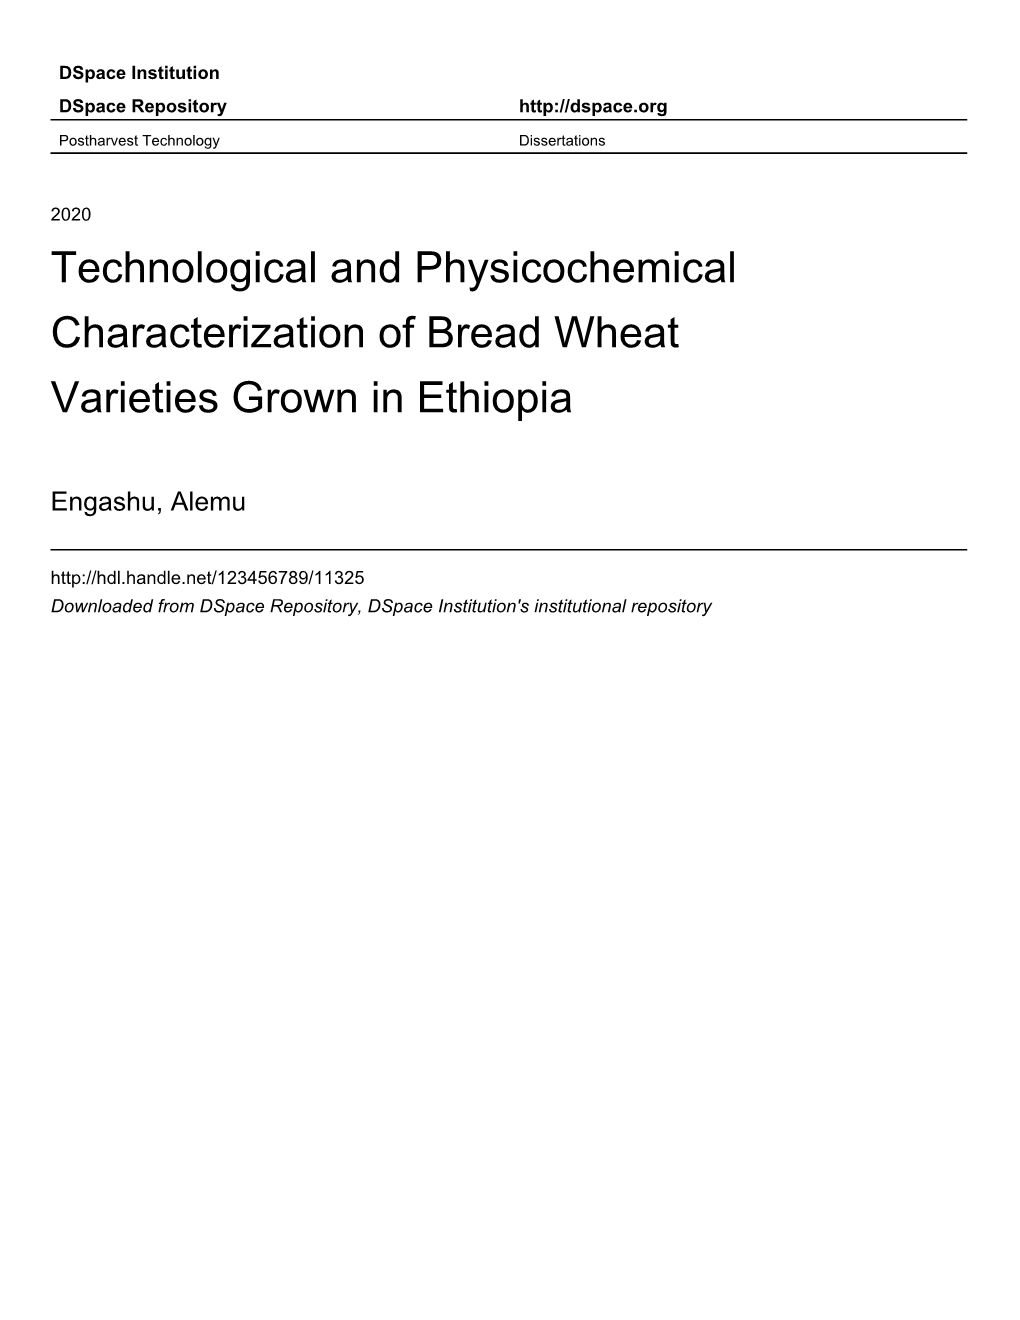 Technological and Physicochemical Characterization of Bread Wheat Varieties Grown in Ethiopia